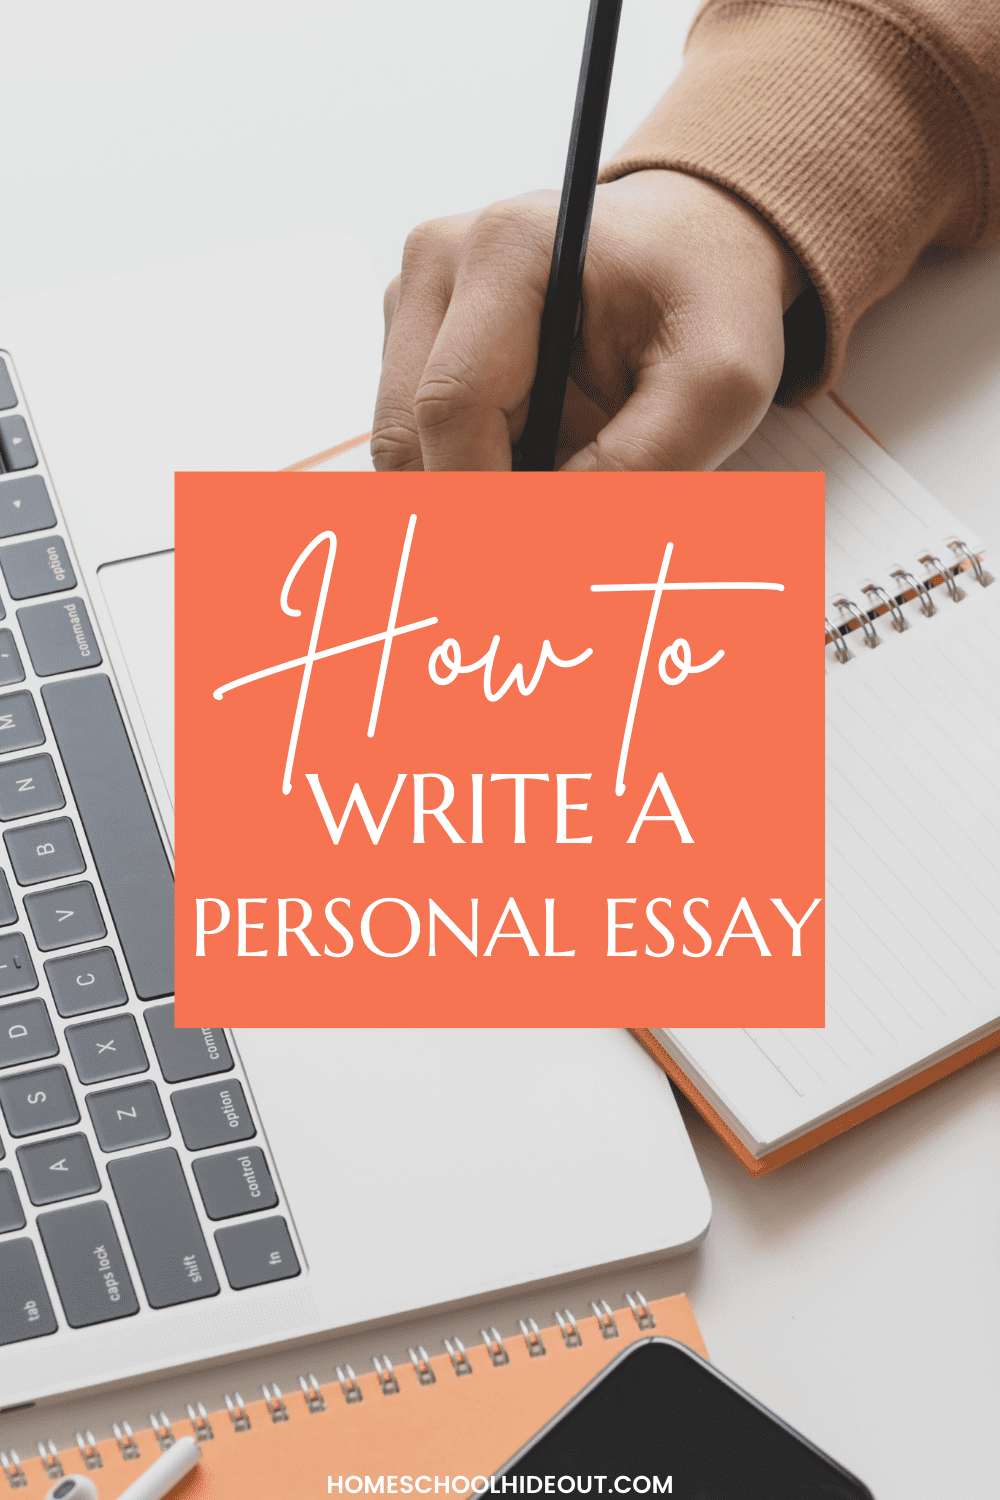 Writing a personal essay is confusing but this broke it down into steps I can actually DO!